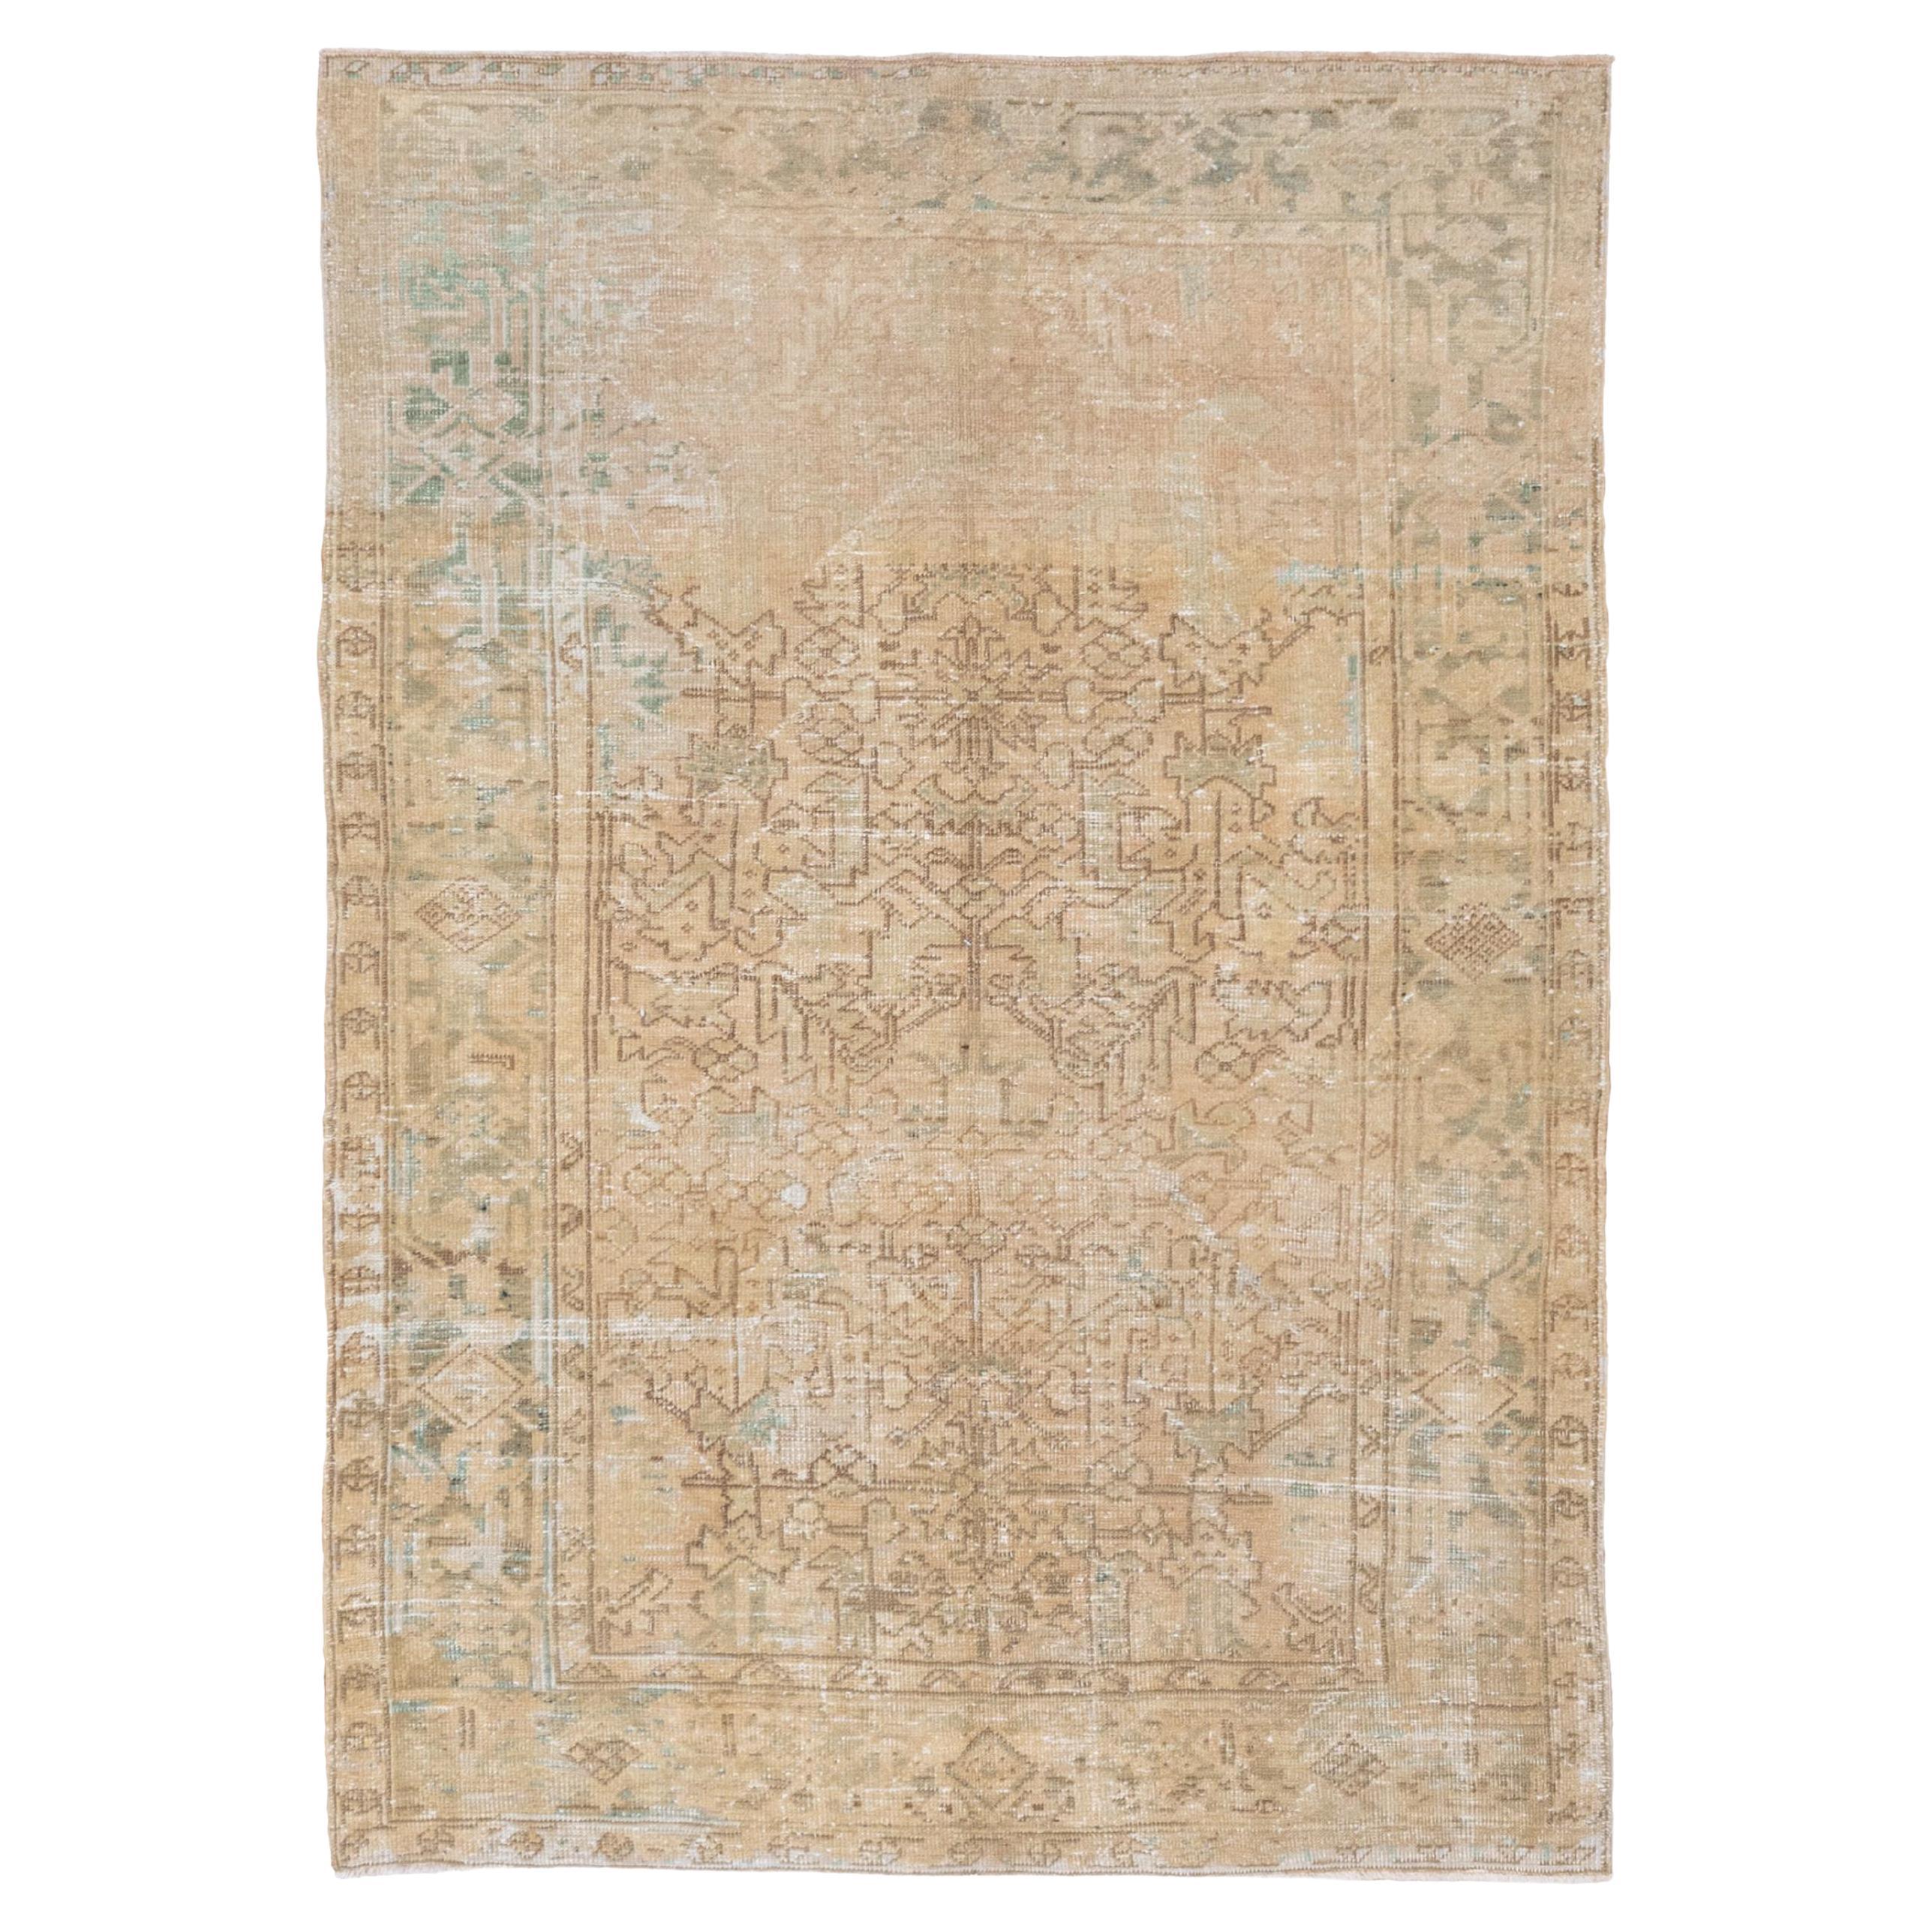 Shabby Chic Antique Persian Heriz Rug, Neutral Palette with Blue & Green Accents For Sale